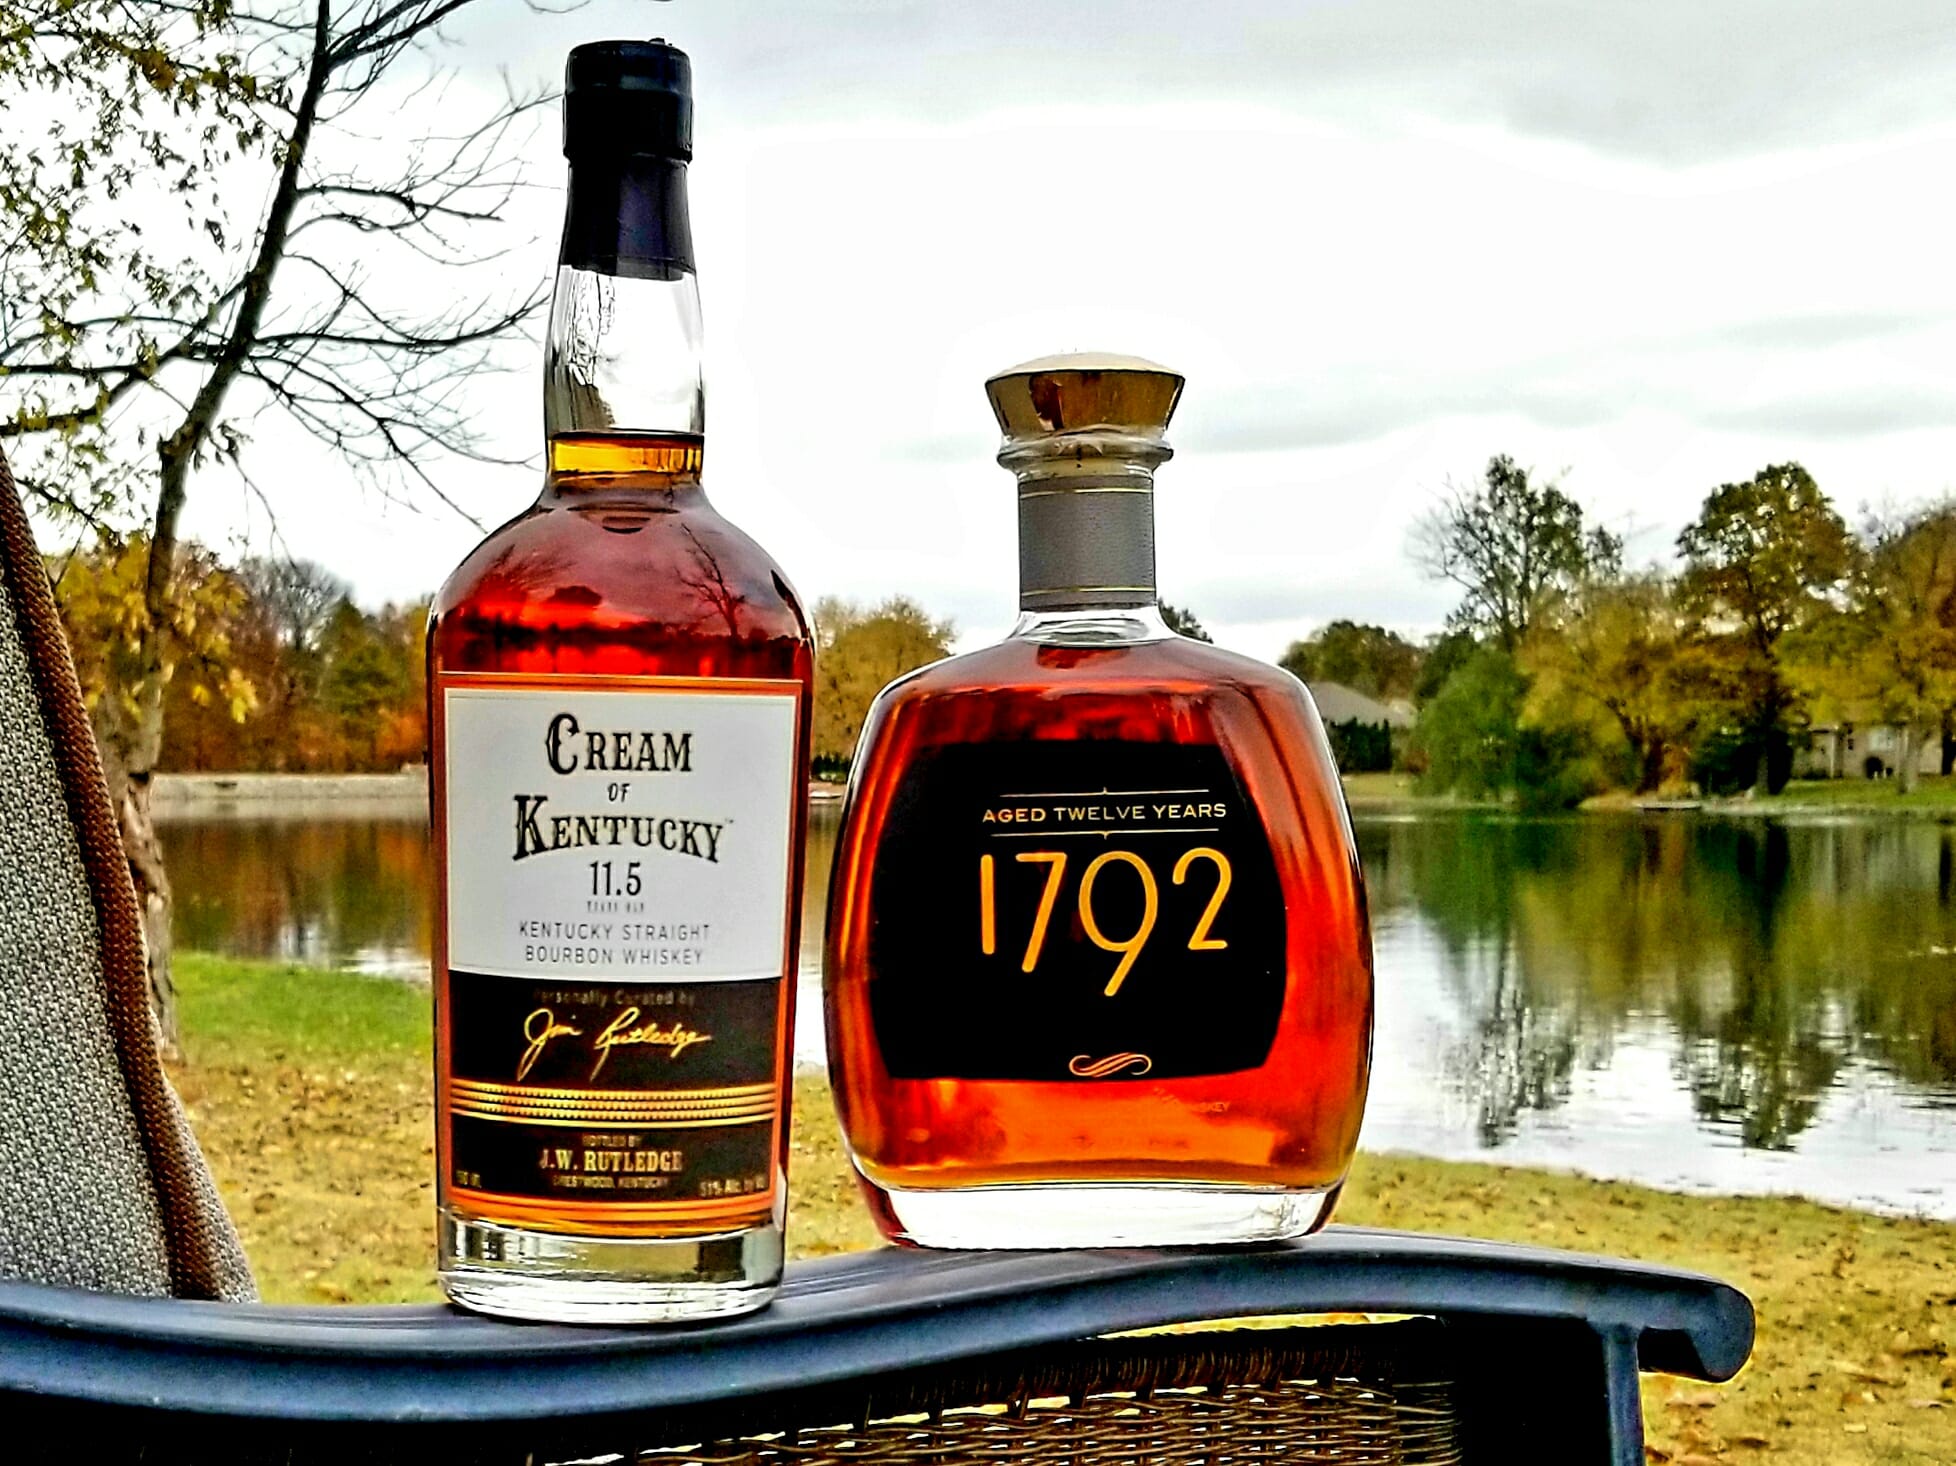 1792 Aged 12 Years vs Cream of Kentucky Review